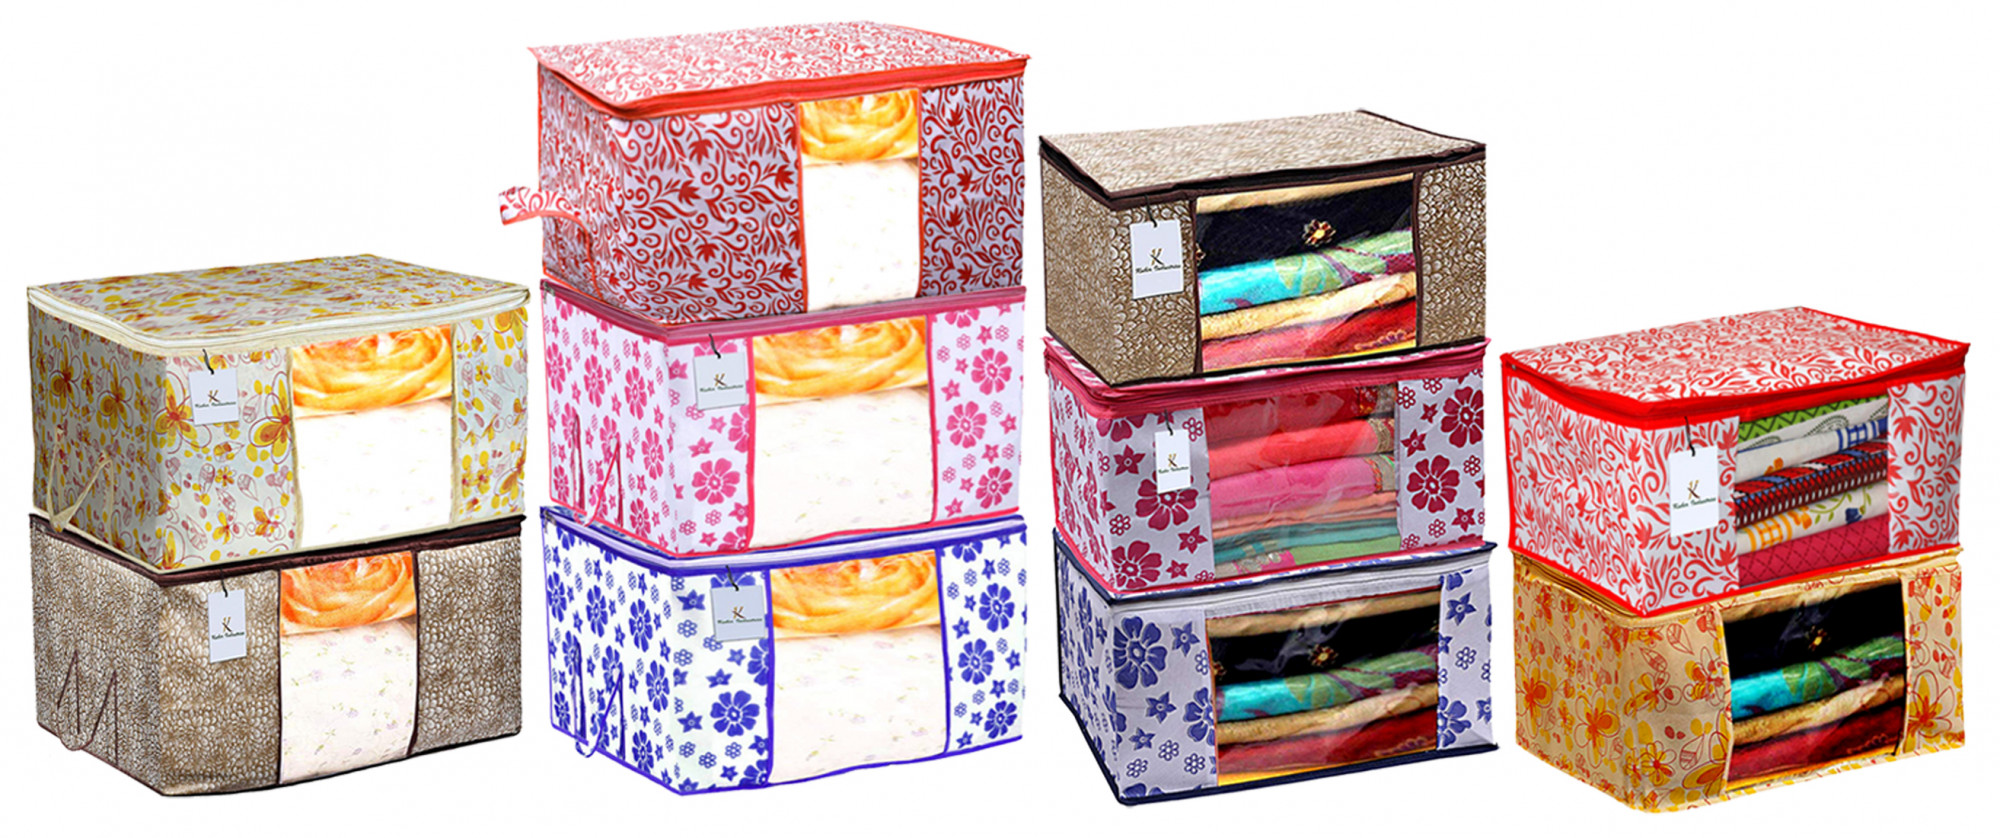 Kuber Industries Flower & Leaf Printed 5 Piece Non Woven Saree Cover And 5 Pieces Underbed Storage Bag, Storage Organiser, Blanket Cover, Pink & Blue & Ivory Red & Golden Brown & Red  -CTKTC42453